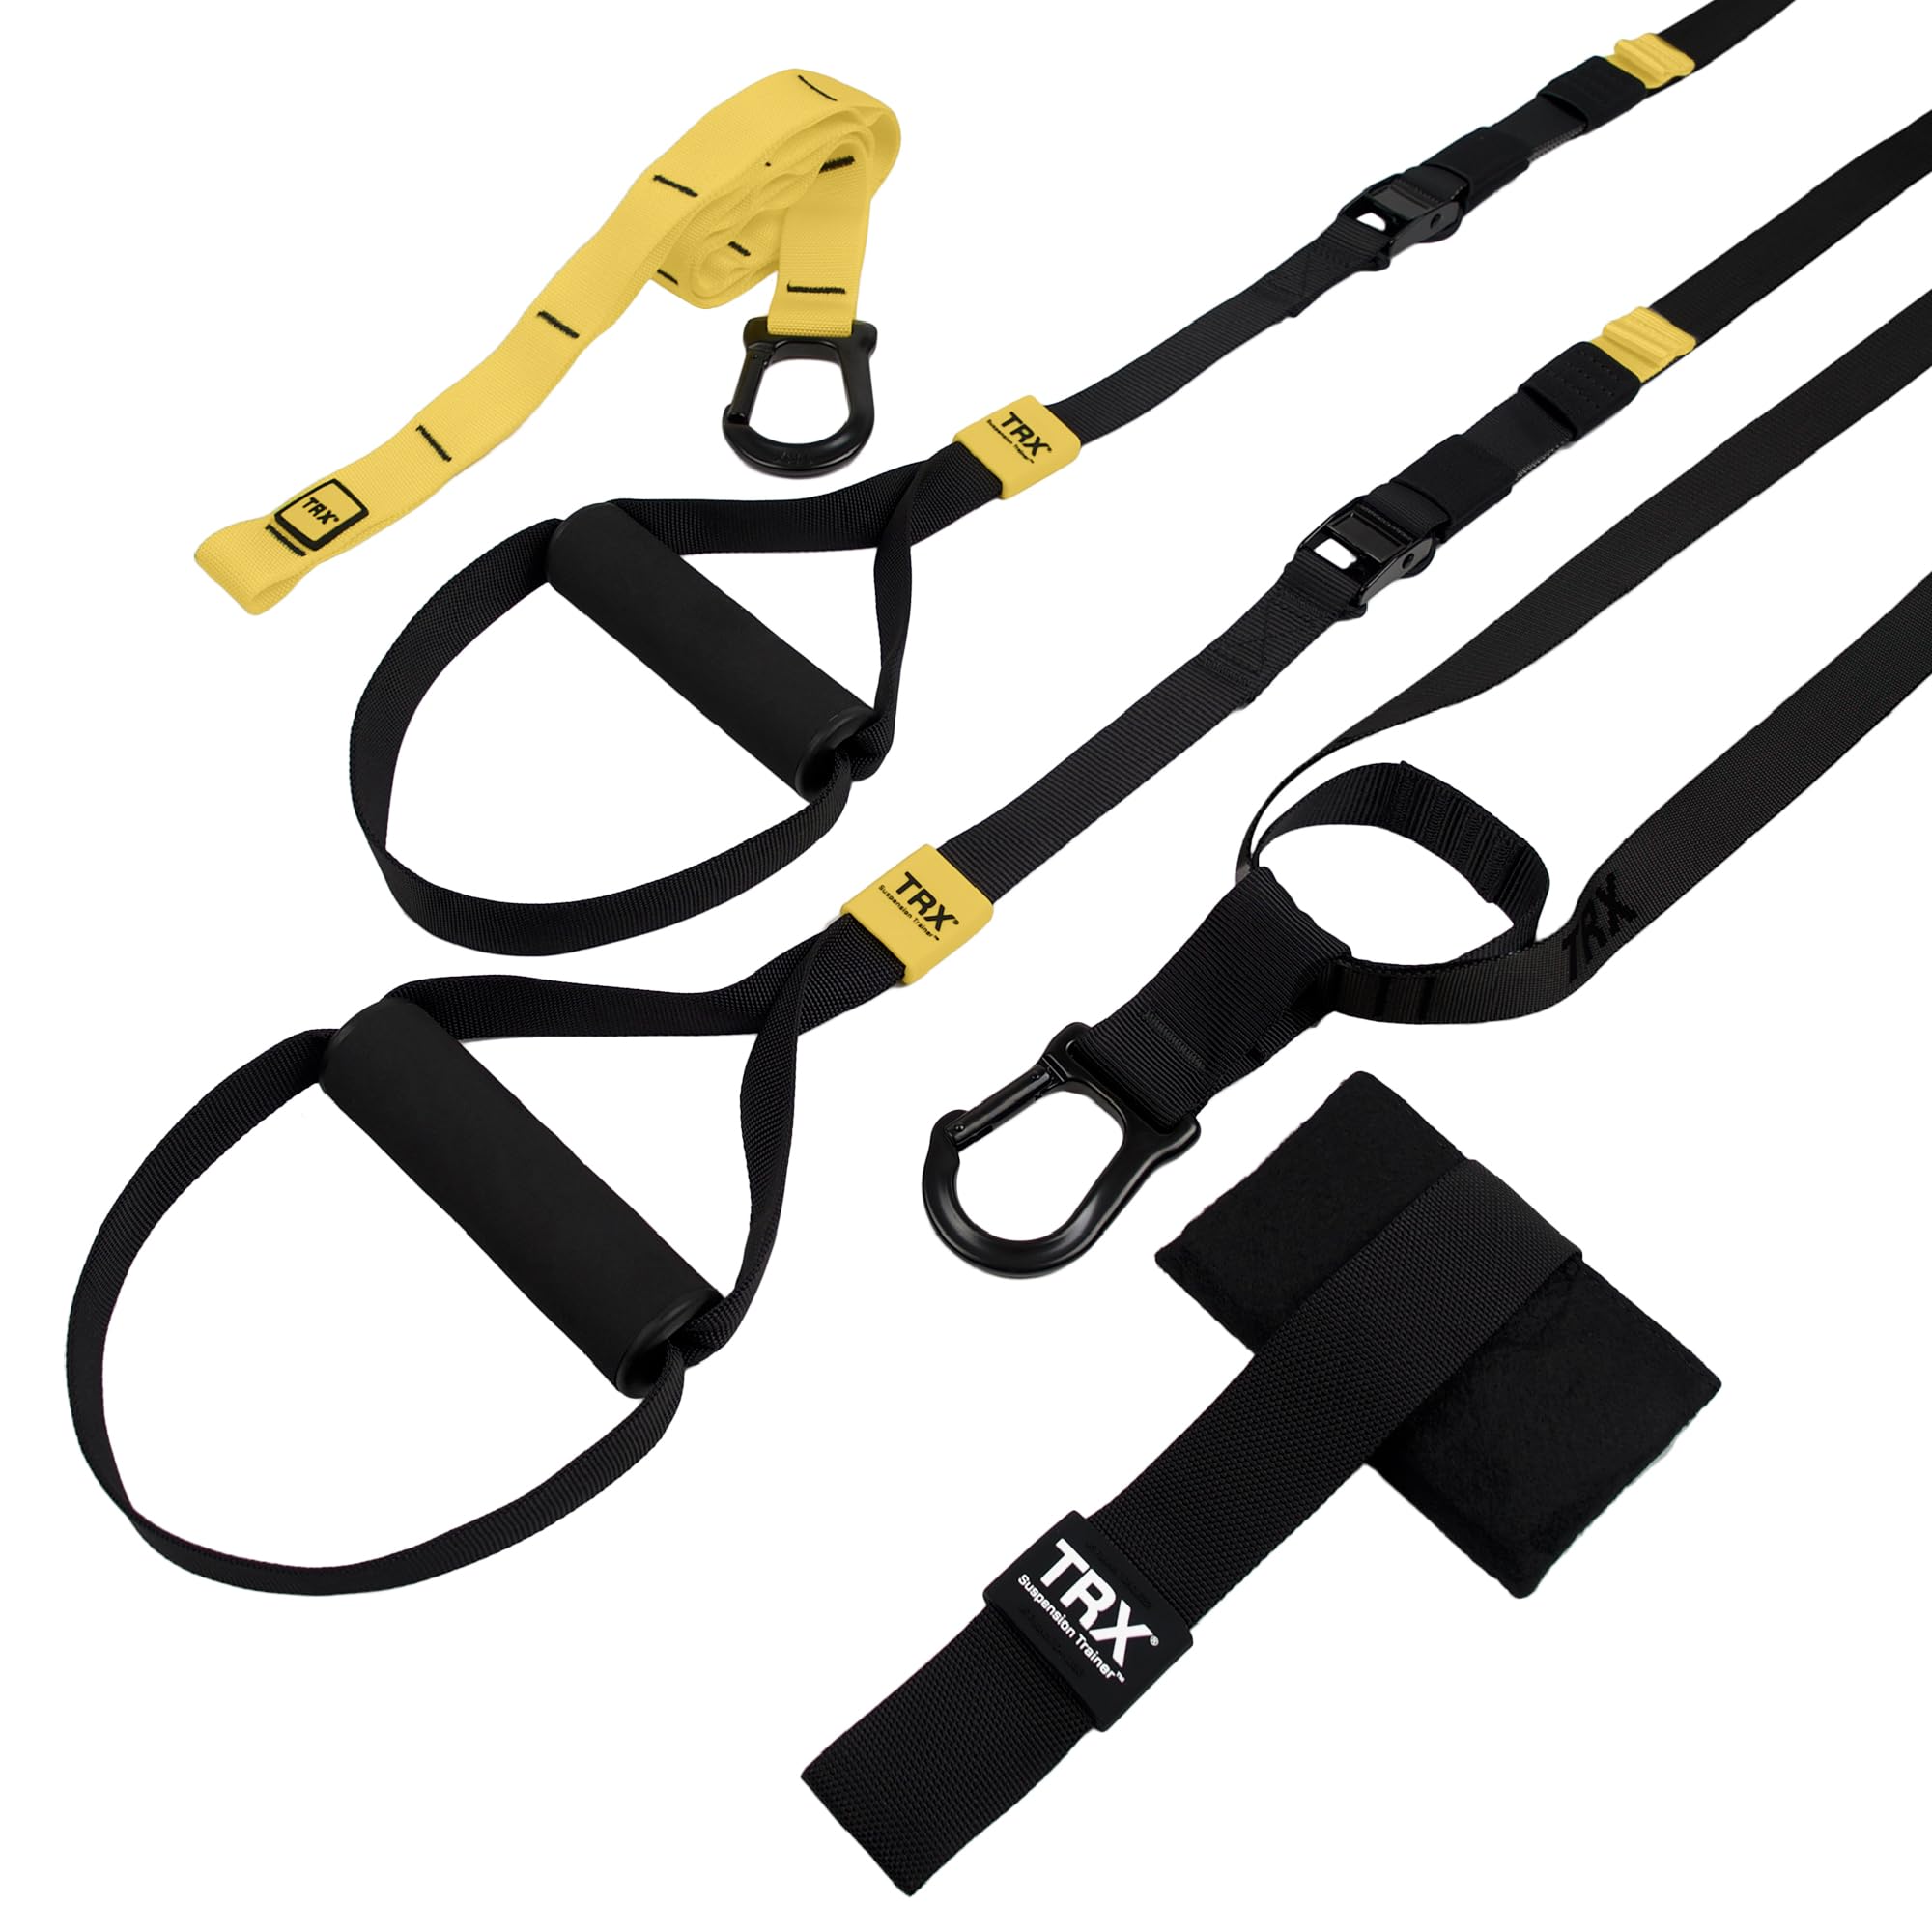 TRX all-in-one suspension trainer